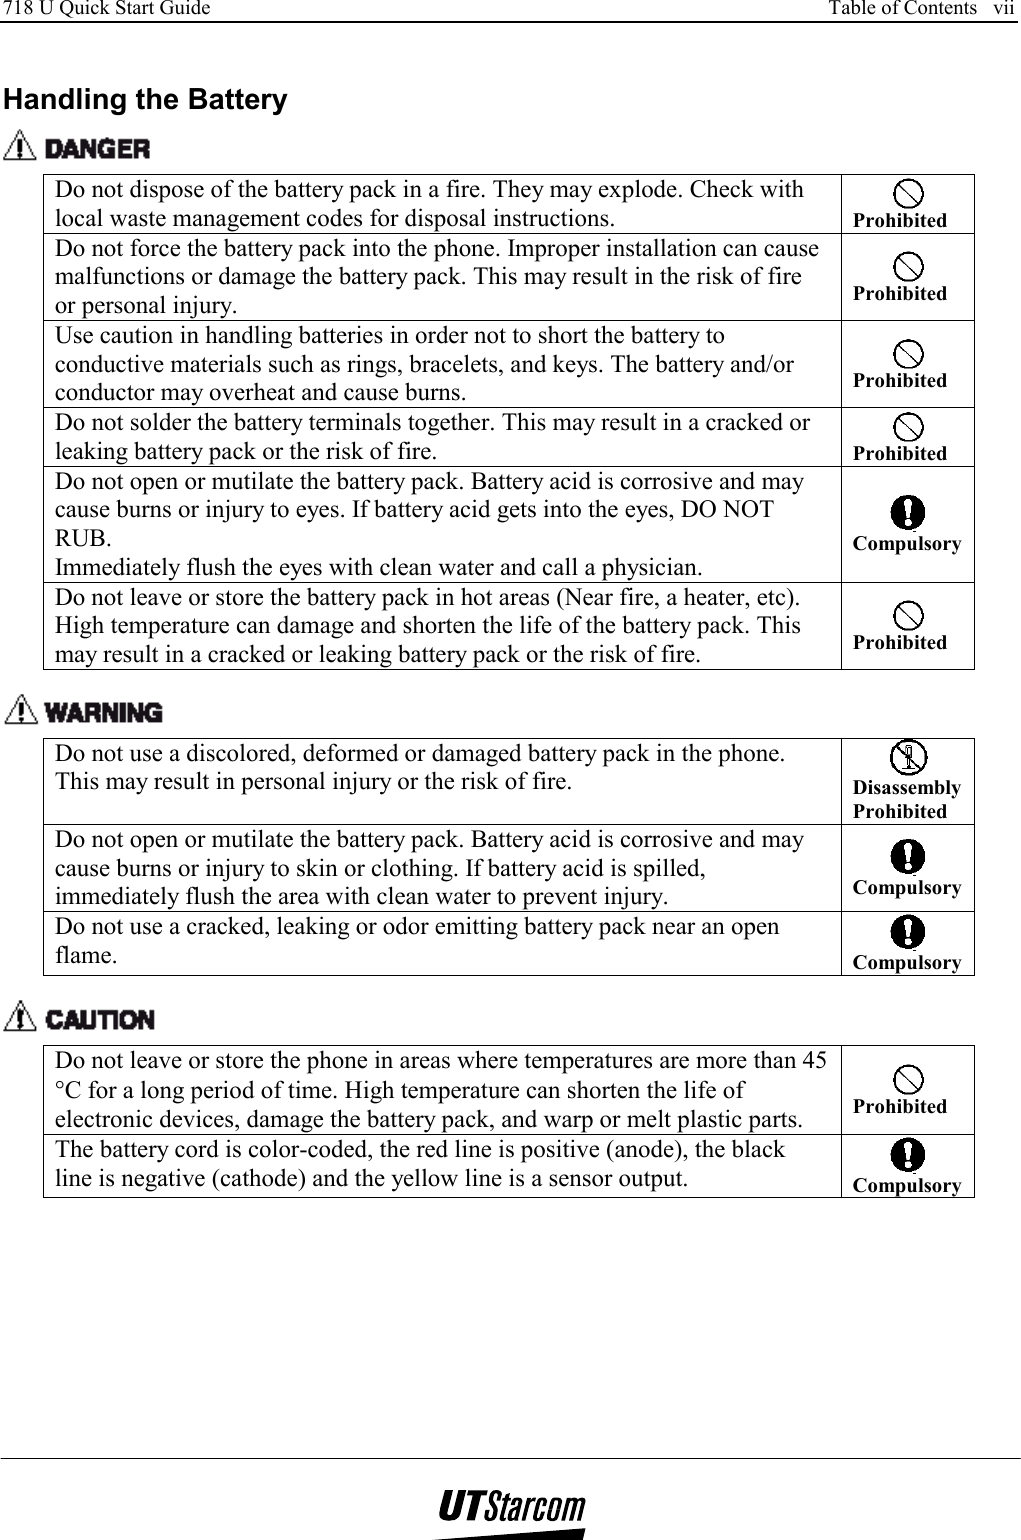 718 U Quick Start Guide      Table of Contents   vii    Handling the Battery  Do not dispose of the battery pack in a fire. They may explode. Check with local waste management codes for disposal instructions.   Prohibited Do not force the battery pack into the phone. Improper installation can cause malfunctions or damage the battery pack. This may result in the risk of fire or personal injury.  Prohibited Use caution in handling batteries in order not to short the battery to conductive materials such as rings, bracelets, and keys. The battery and/or conductor may overheat and cause burns.  Prohibited Do not solder the battery terminals together. This may result in a cracked or leaking battery pack or the risk of fire.   Prohibited Do not open or mutilate the battery pack. Battery acid is corrosive and may cause burns or injury to eyes. If battery acid gets into the eyes, DO NOT RUB. Immediately flush the eyes with clean water and call a physician.  CompulsoryDo not leave or store the battery pack in hot areas (Near fire, a heater, etc). High temperature can damage and shorten the life of the battery pack. This may result in a cracked or leaking battery pack or the risk of fire.  Prohibited   Do not use a discolored, deformed or damaged battery pack in the phone. This may result in personal injury or the risk of fire.   Disassembly Prohibited Do not open or mutilate the battery pack. Battery acid is corrosive and may cause burns or injury to skin or clothing. If battery acid is spilled, immediately flush the area with clean water to prevent injury.  Compulsory Do not use a cracked, leaking or odor emitting battery pack near an open flame.    Compulsory   Do not leave or store the phone in areas where temperatures are more than 45 °C for a long period of time. High temperature can shorten the life of electronic devices, damage the battery pack, and warp or melt plastic parts.  Prohibited The battery cord is color-coded, the red line is positive (anode), the black line is negative (cathode) and the yellow line is a sensor output.   Compulsory 